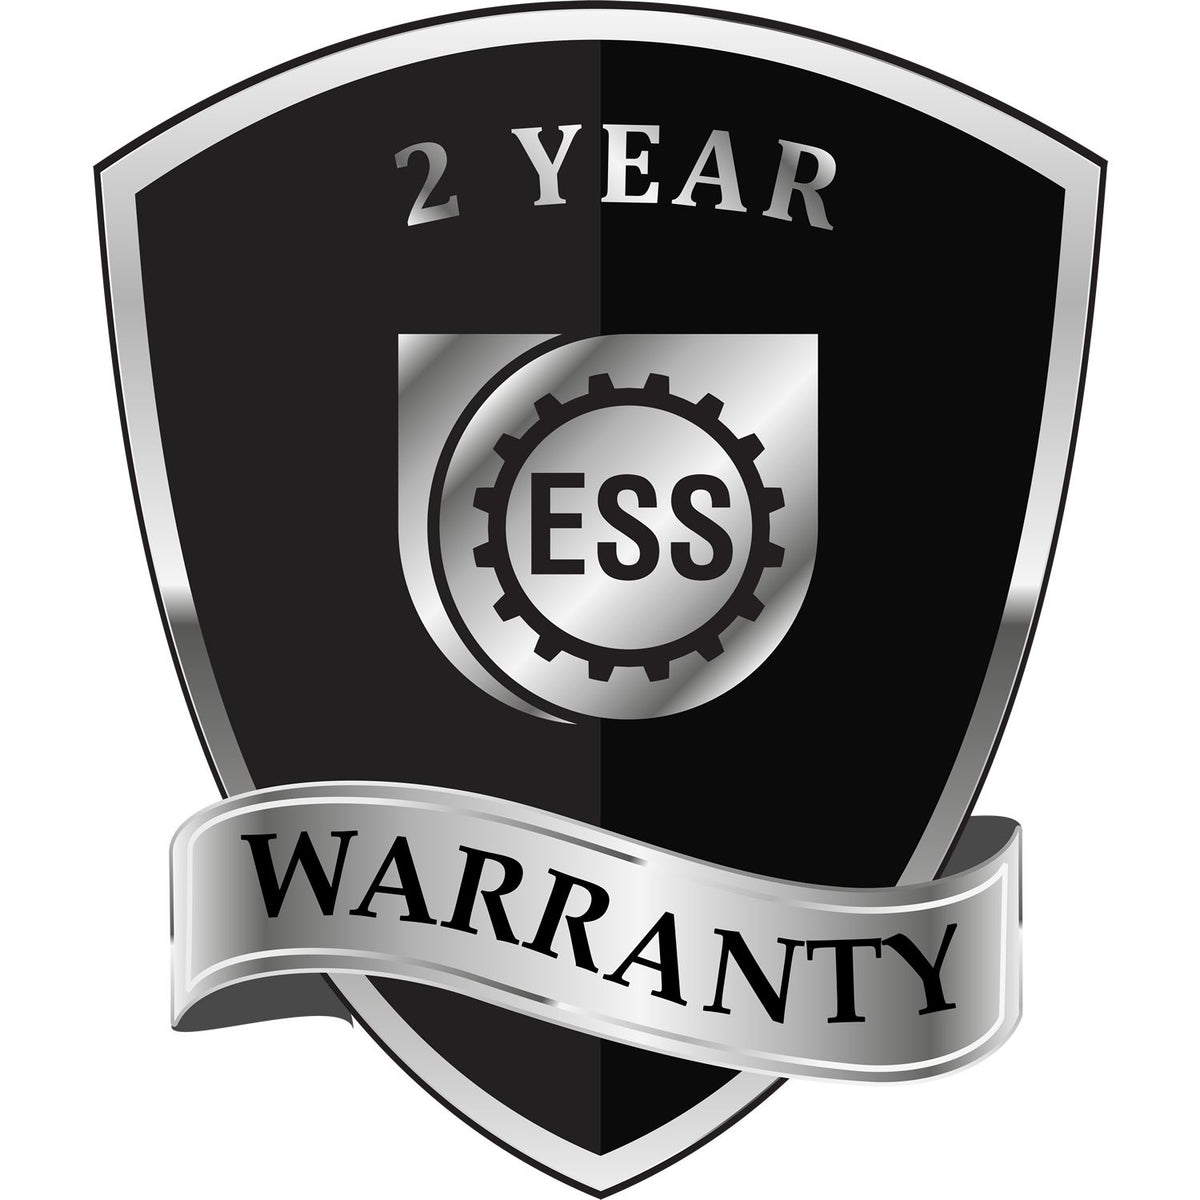 A black and silver badge or emblem showing warranty information for the Hybrid Idaho Engineer Seal